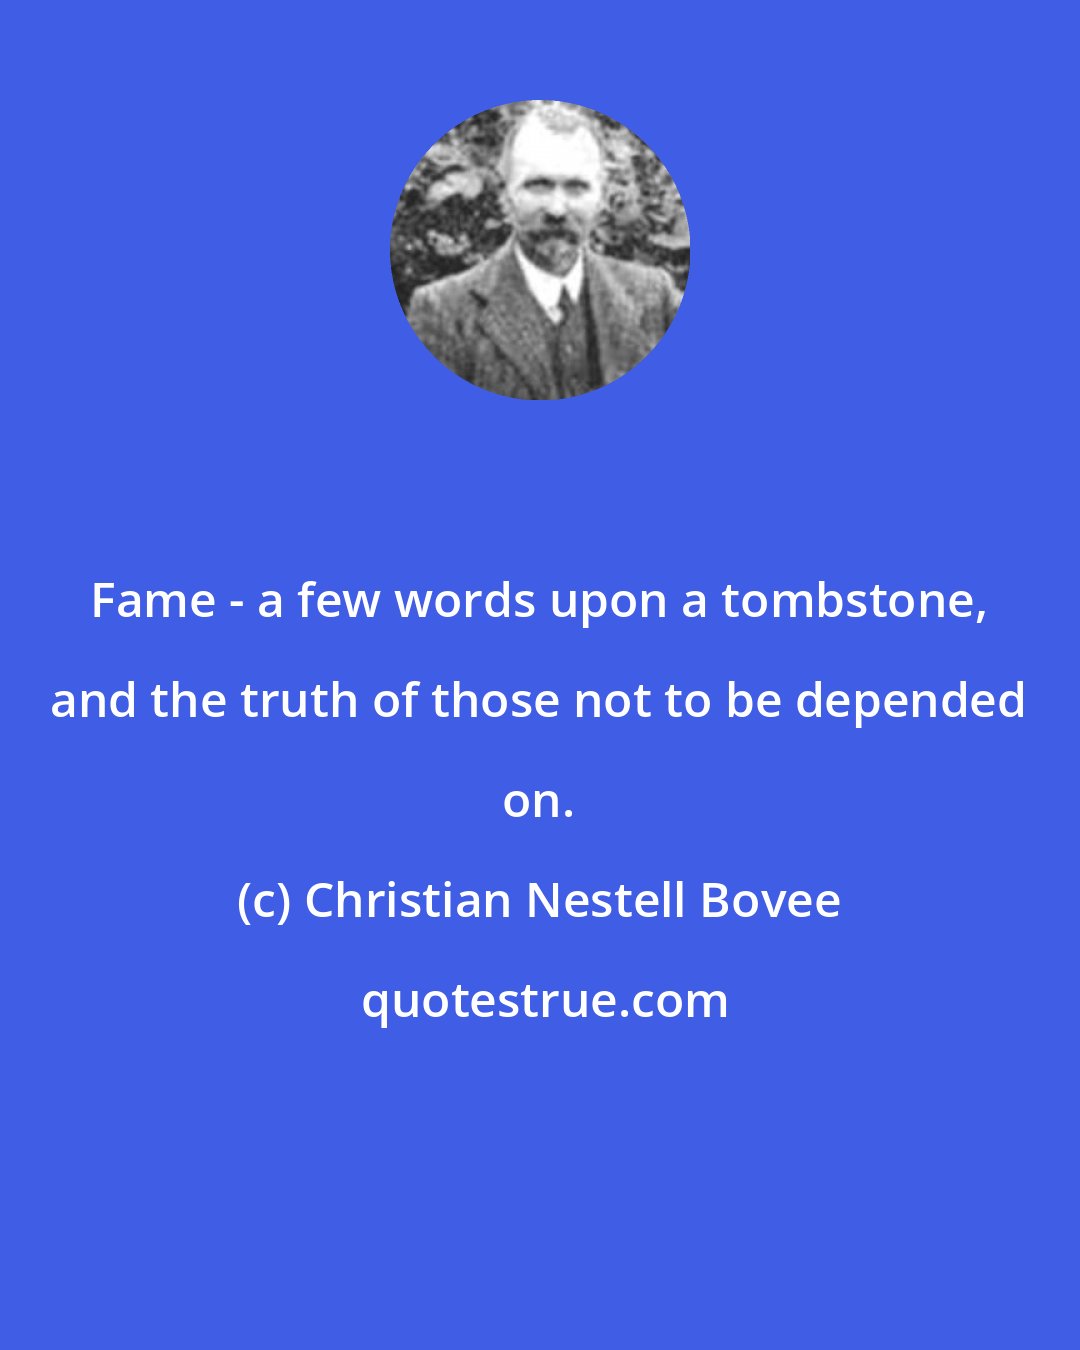 Christian Nestell Bovee: Fame - a few words upon a tombstone, and the truth of those not to be depended on.